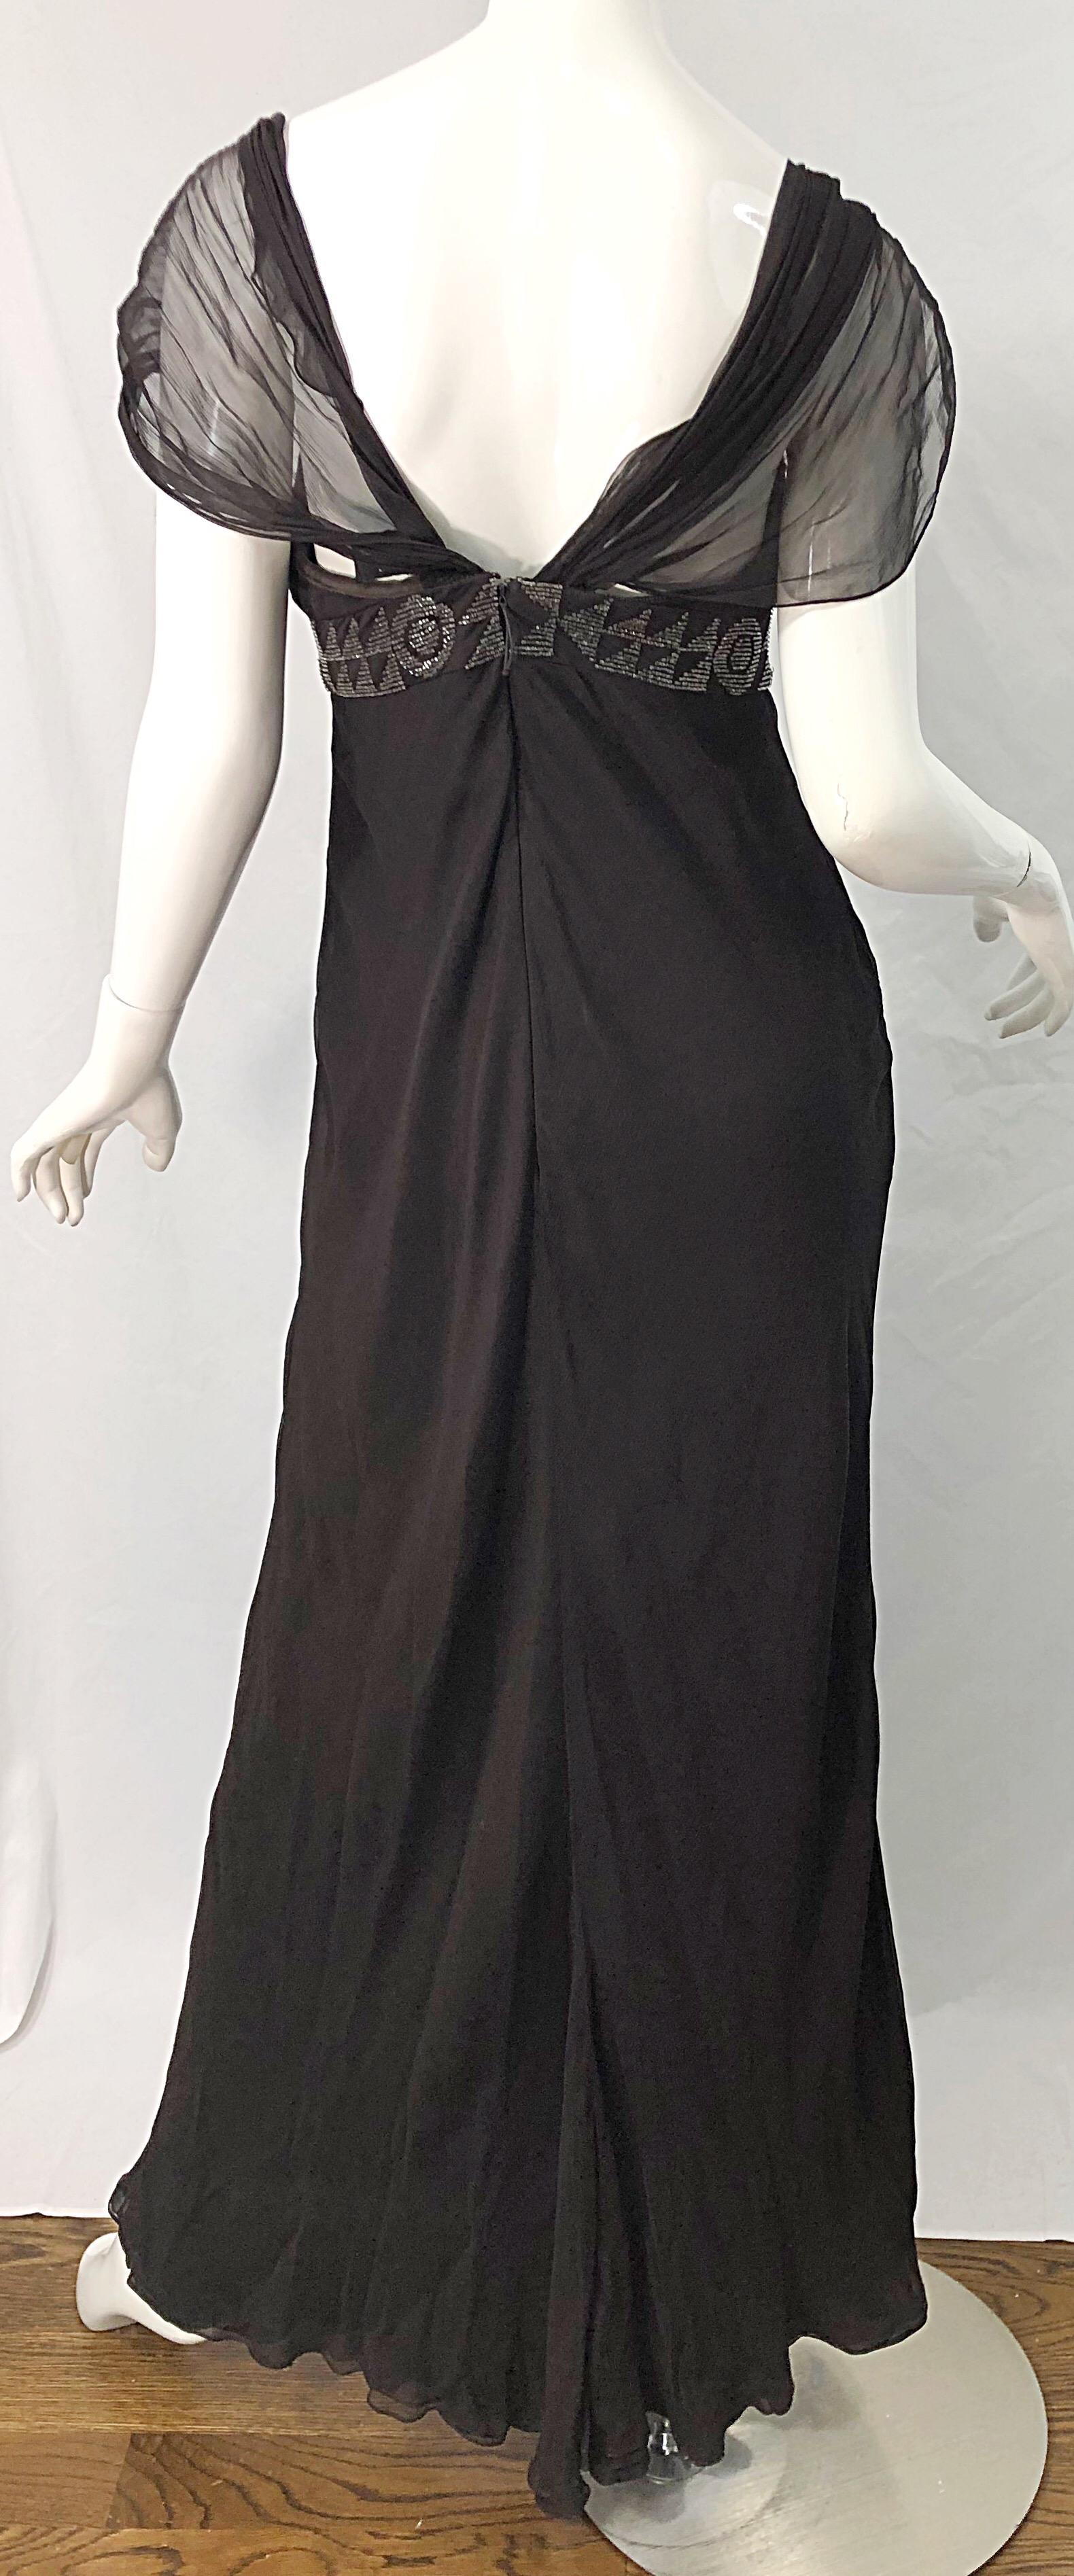 J Mendel Size 8 Early 2000s Brown Silk Chiffon Beaded Grecian Style Evening Gown For Sale 1